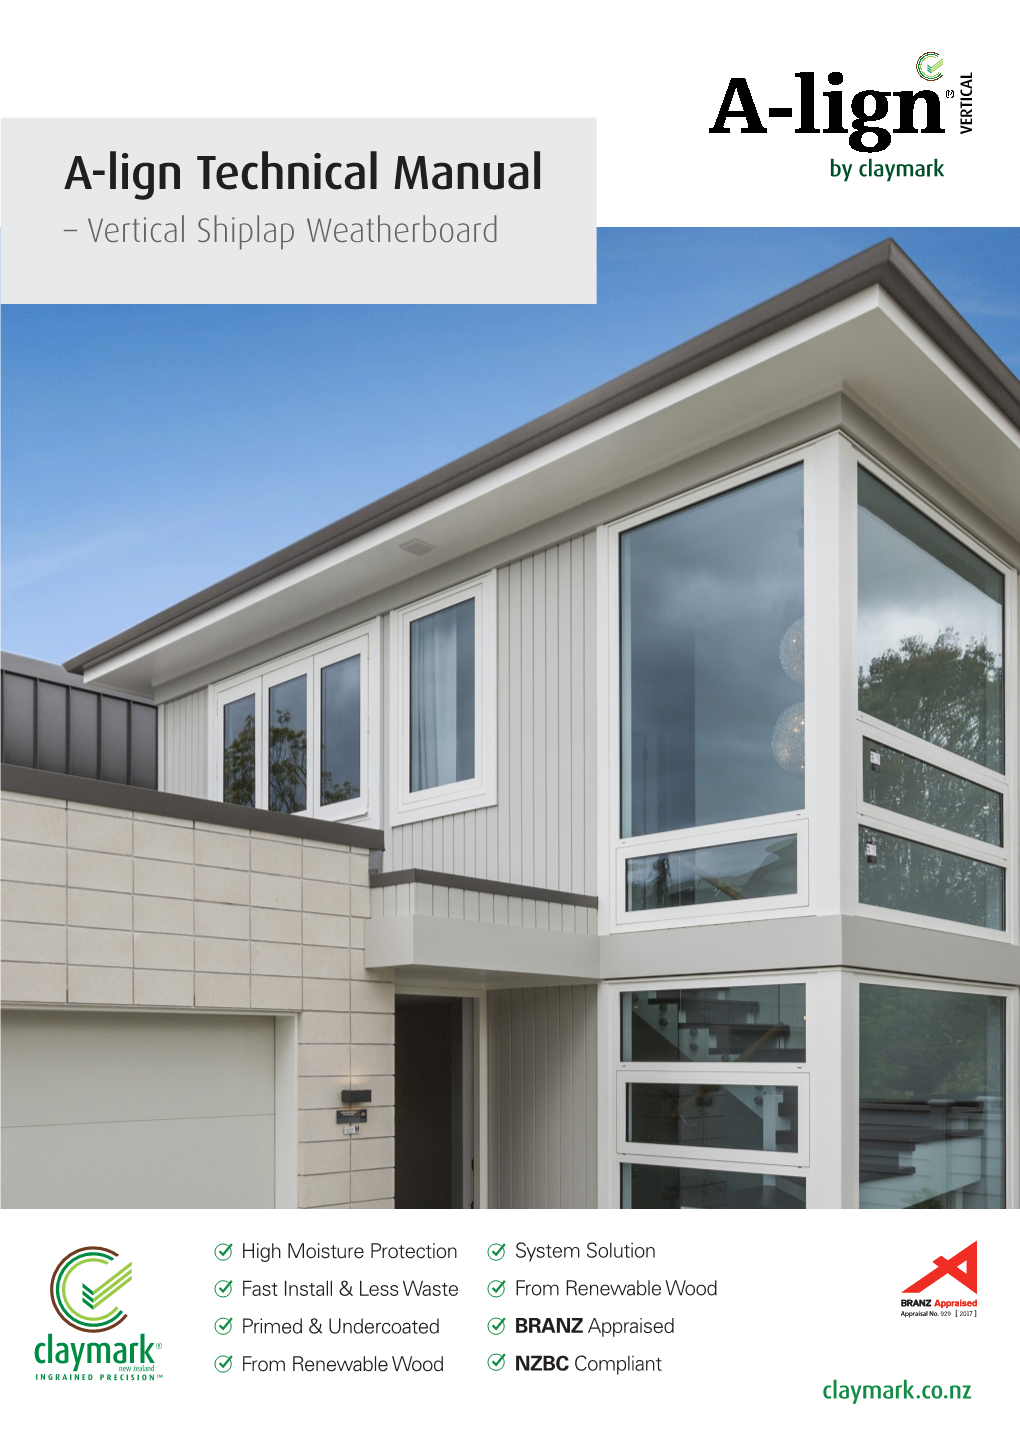 A-Lign Technical Manual – Vertical Shiplap Weatherboard